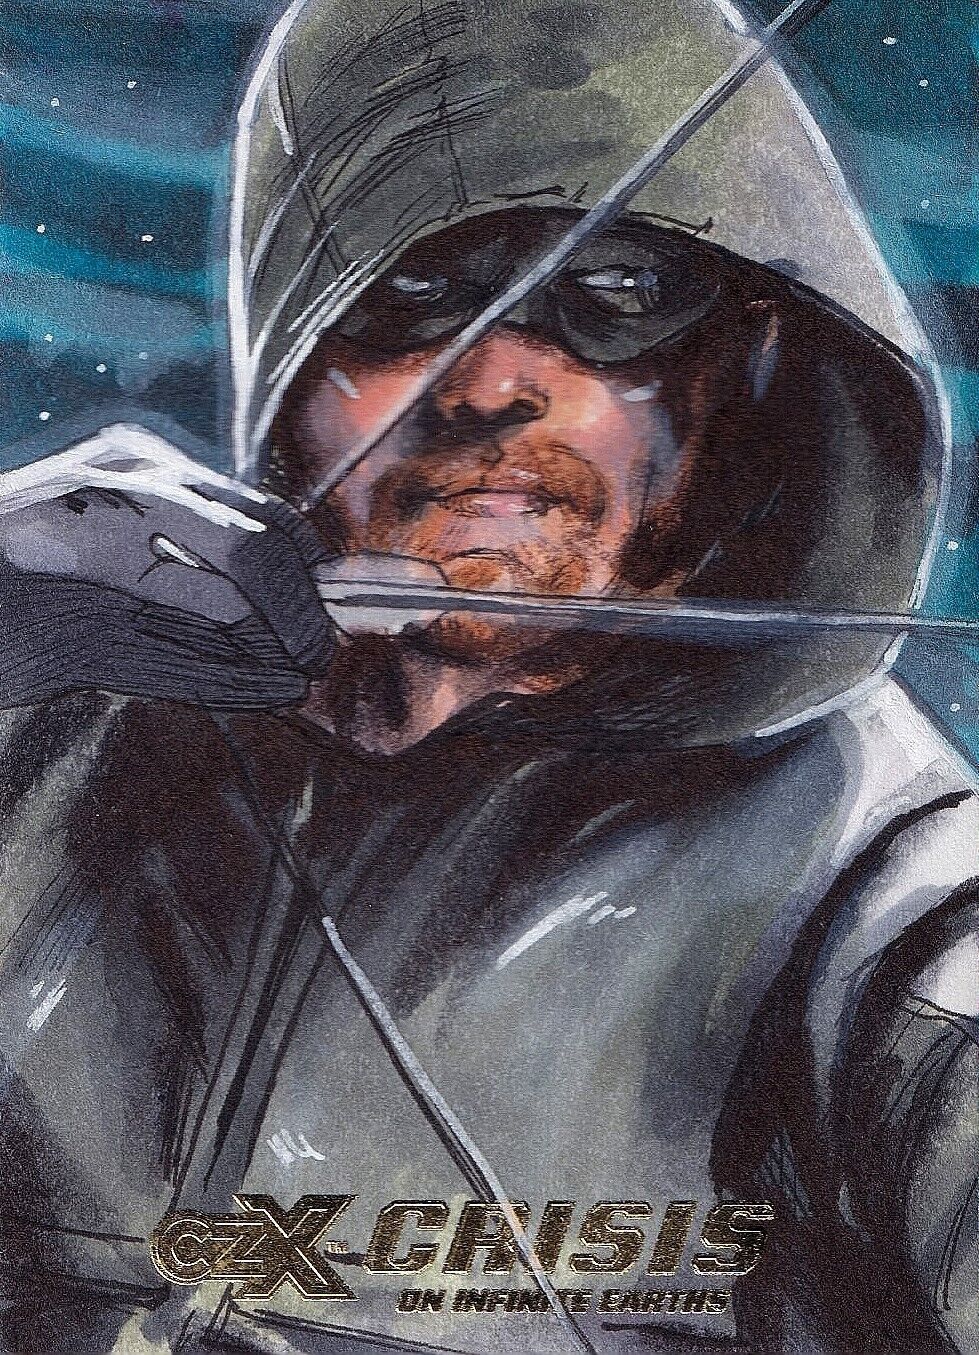 Cryptozoic CZX Crisis on Infinite Earths Green Arrow 1/1 Sketch by Tolunay Kskn